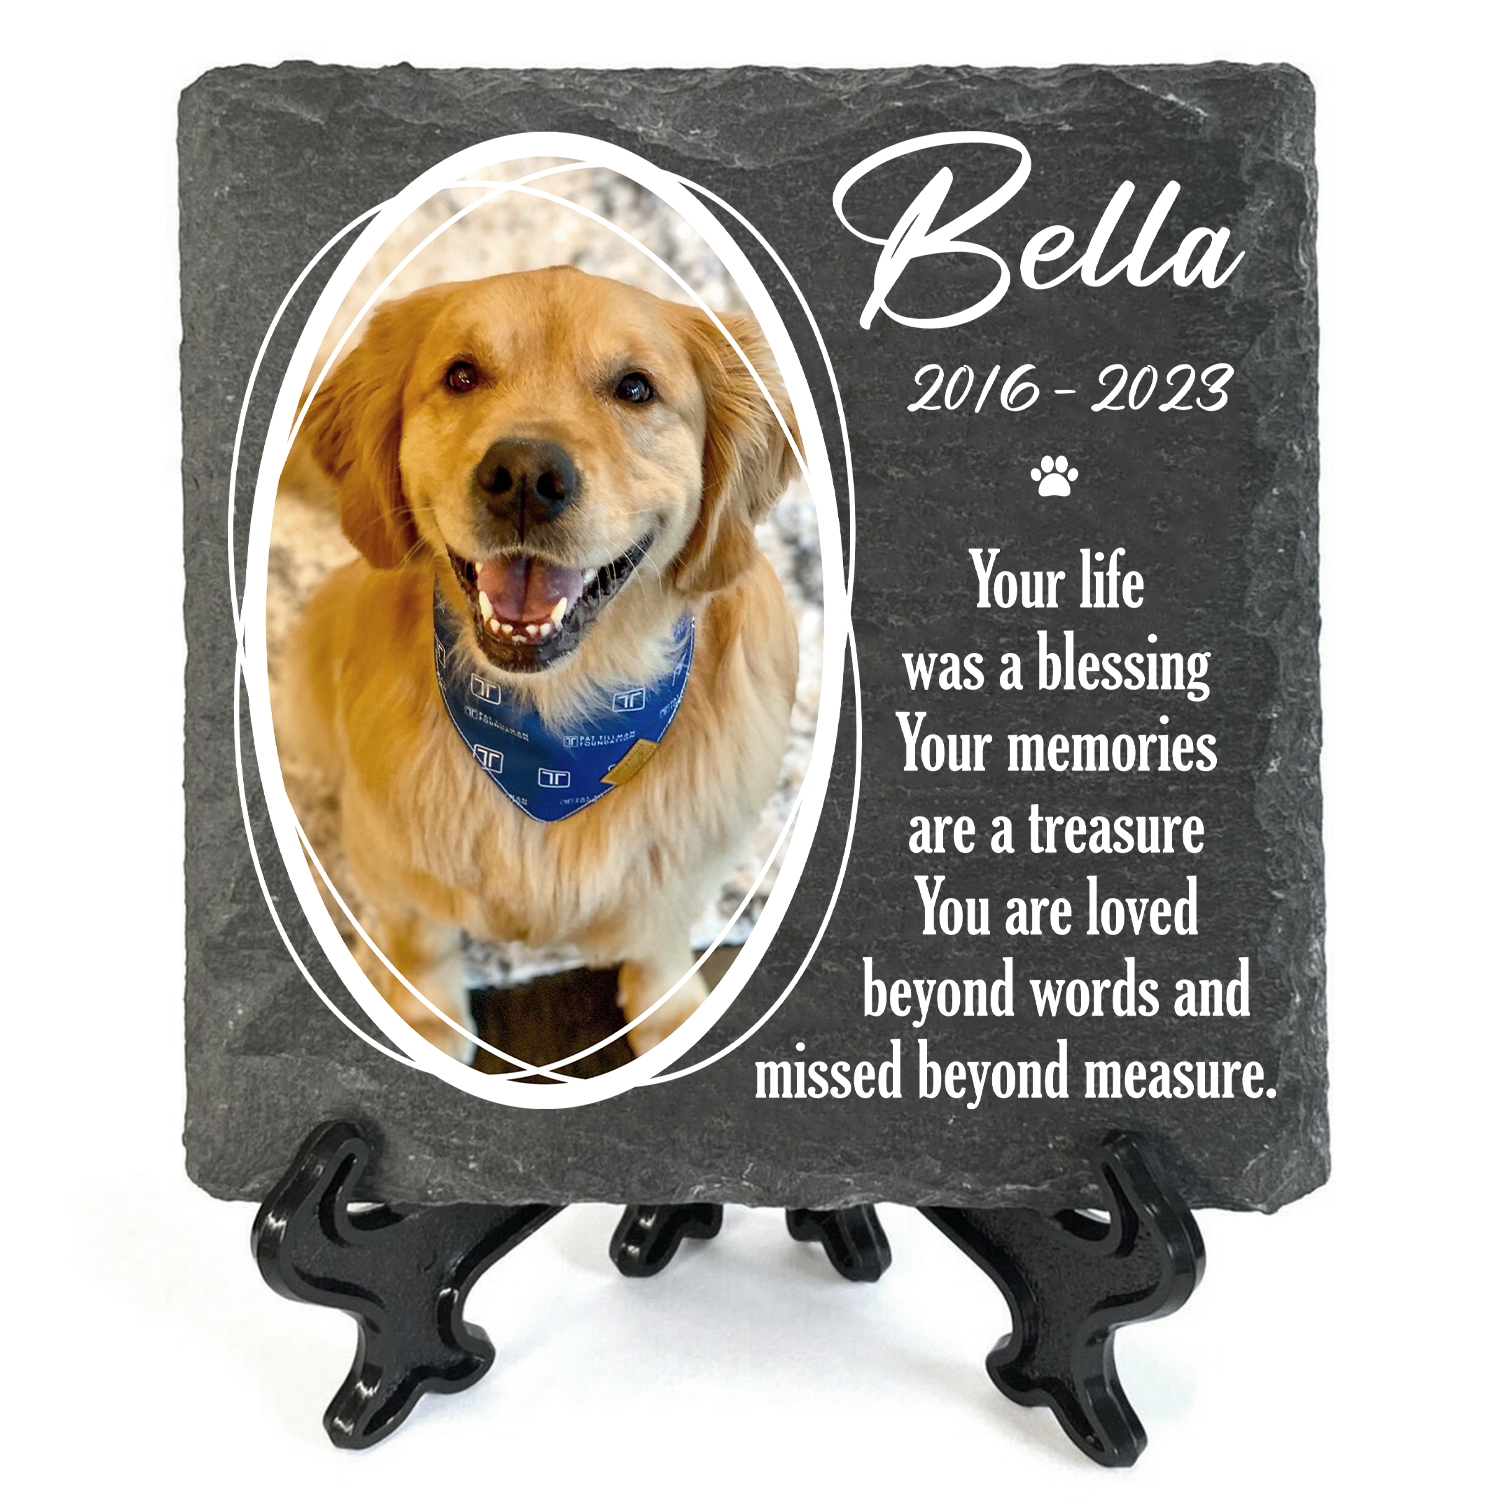 Pet Photo Your Life Was A Blessing Custom Dog Memorial Stone, Pet Memorial Gifts - Personalized Custom Memorial Tombstone